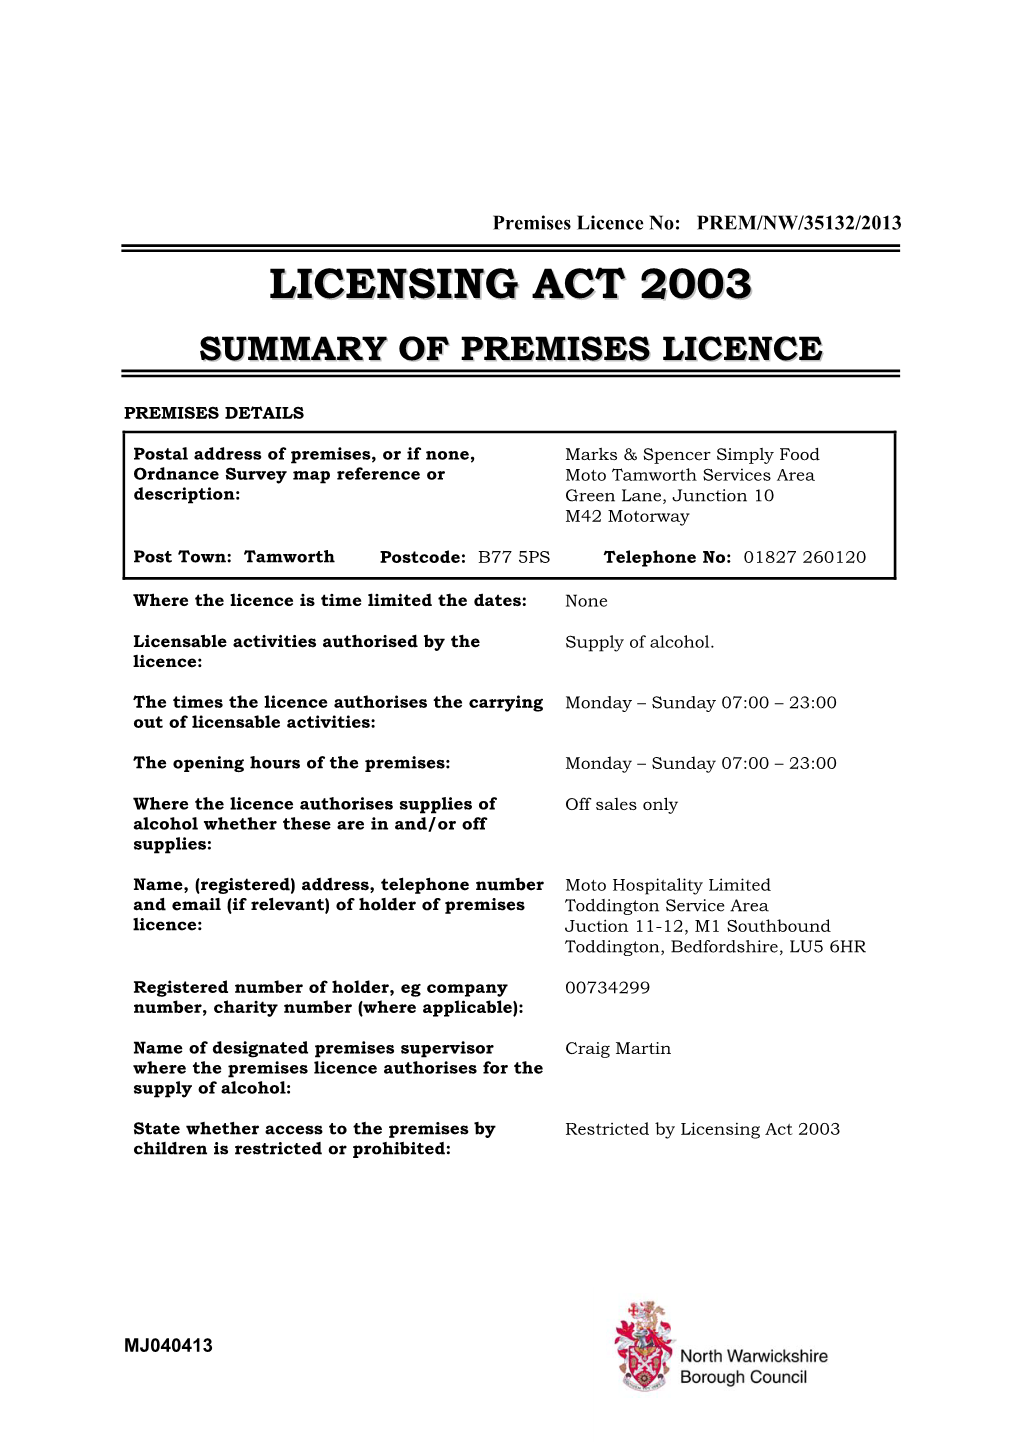 Licensing Act 2003 Children Is Restricted Or Prohibited